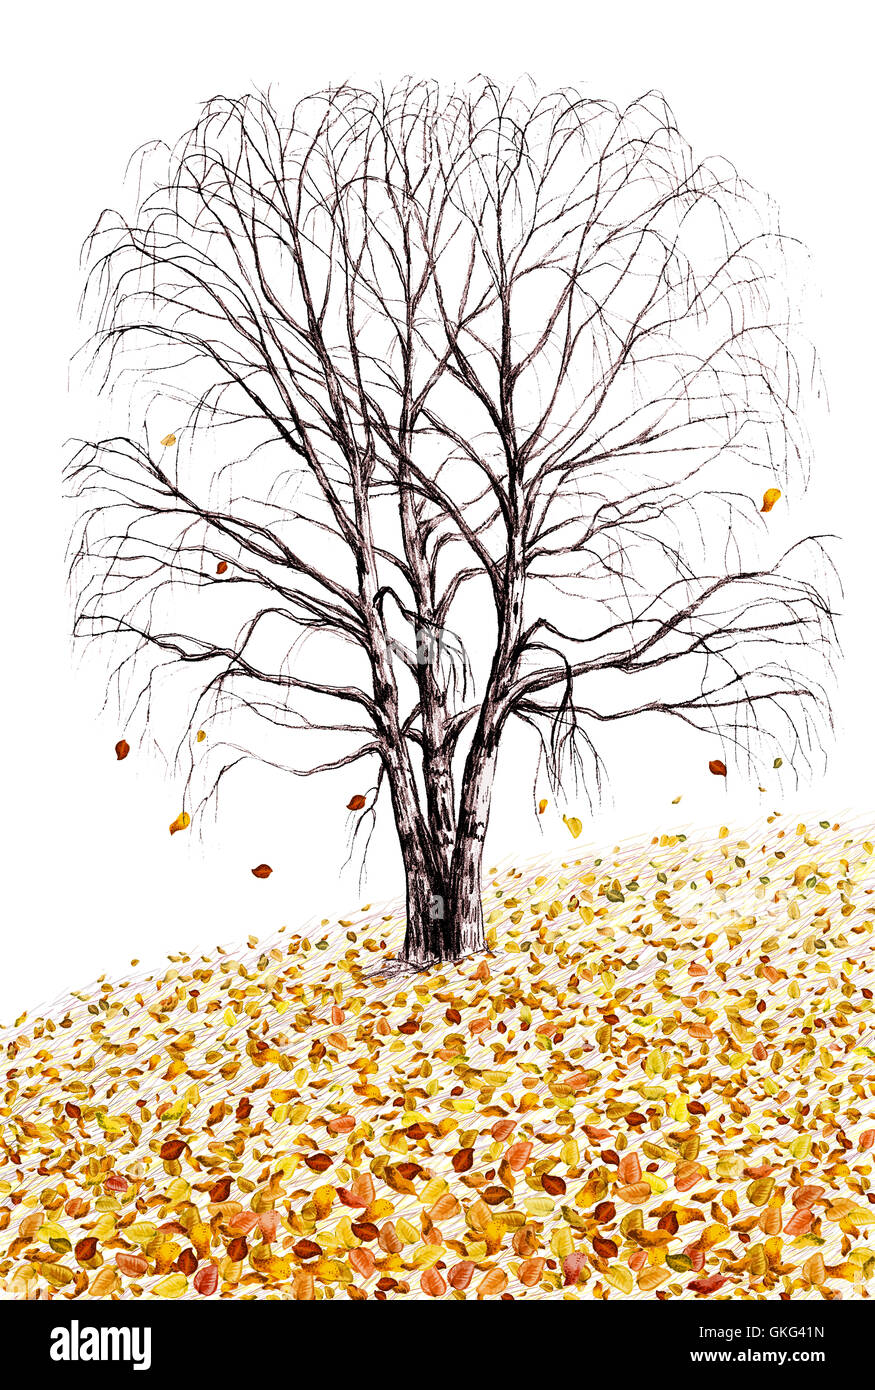 Birch Tree And Fallen Leaves Hand Drawn Illustration Isolated On Stock Photo Alamy